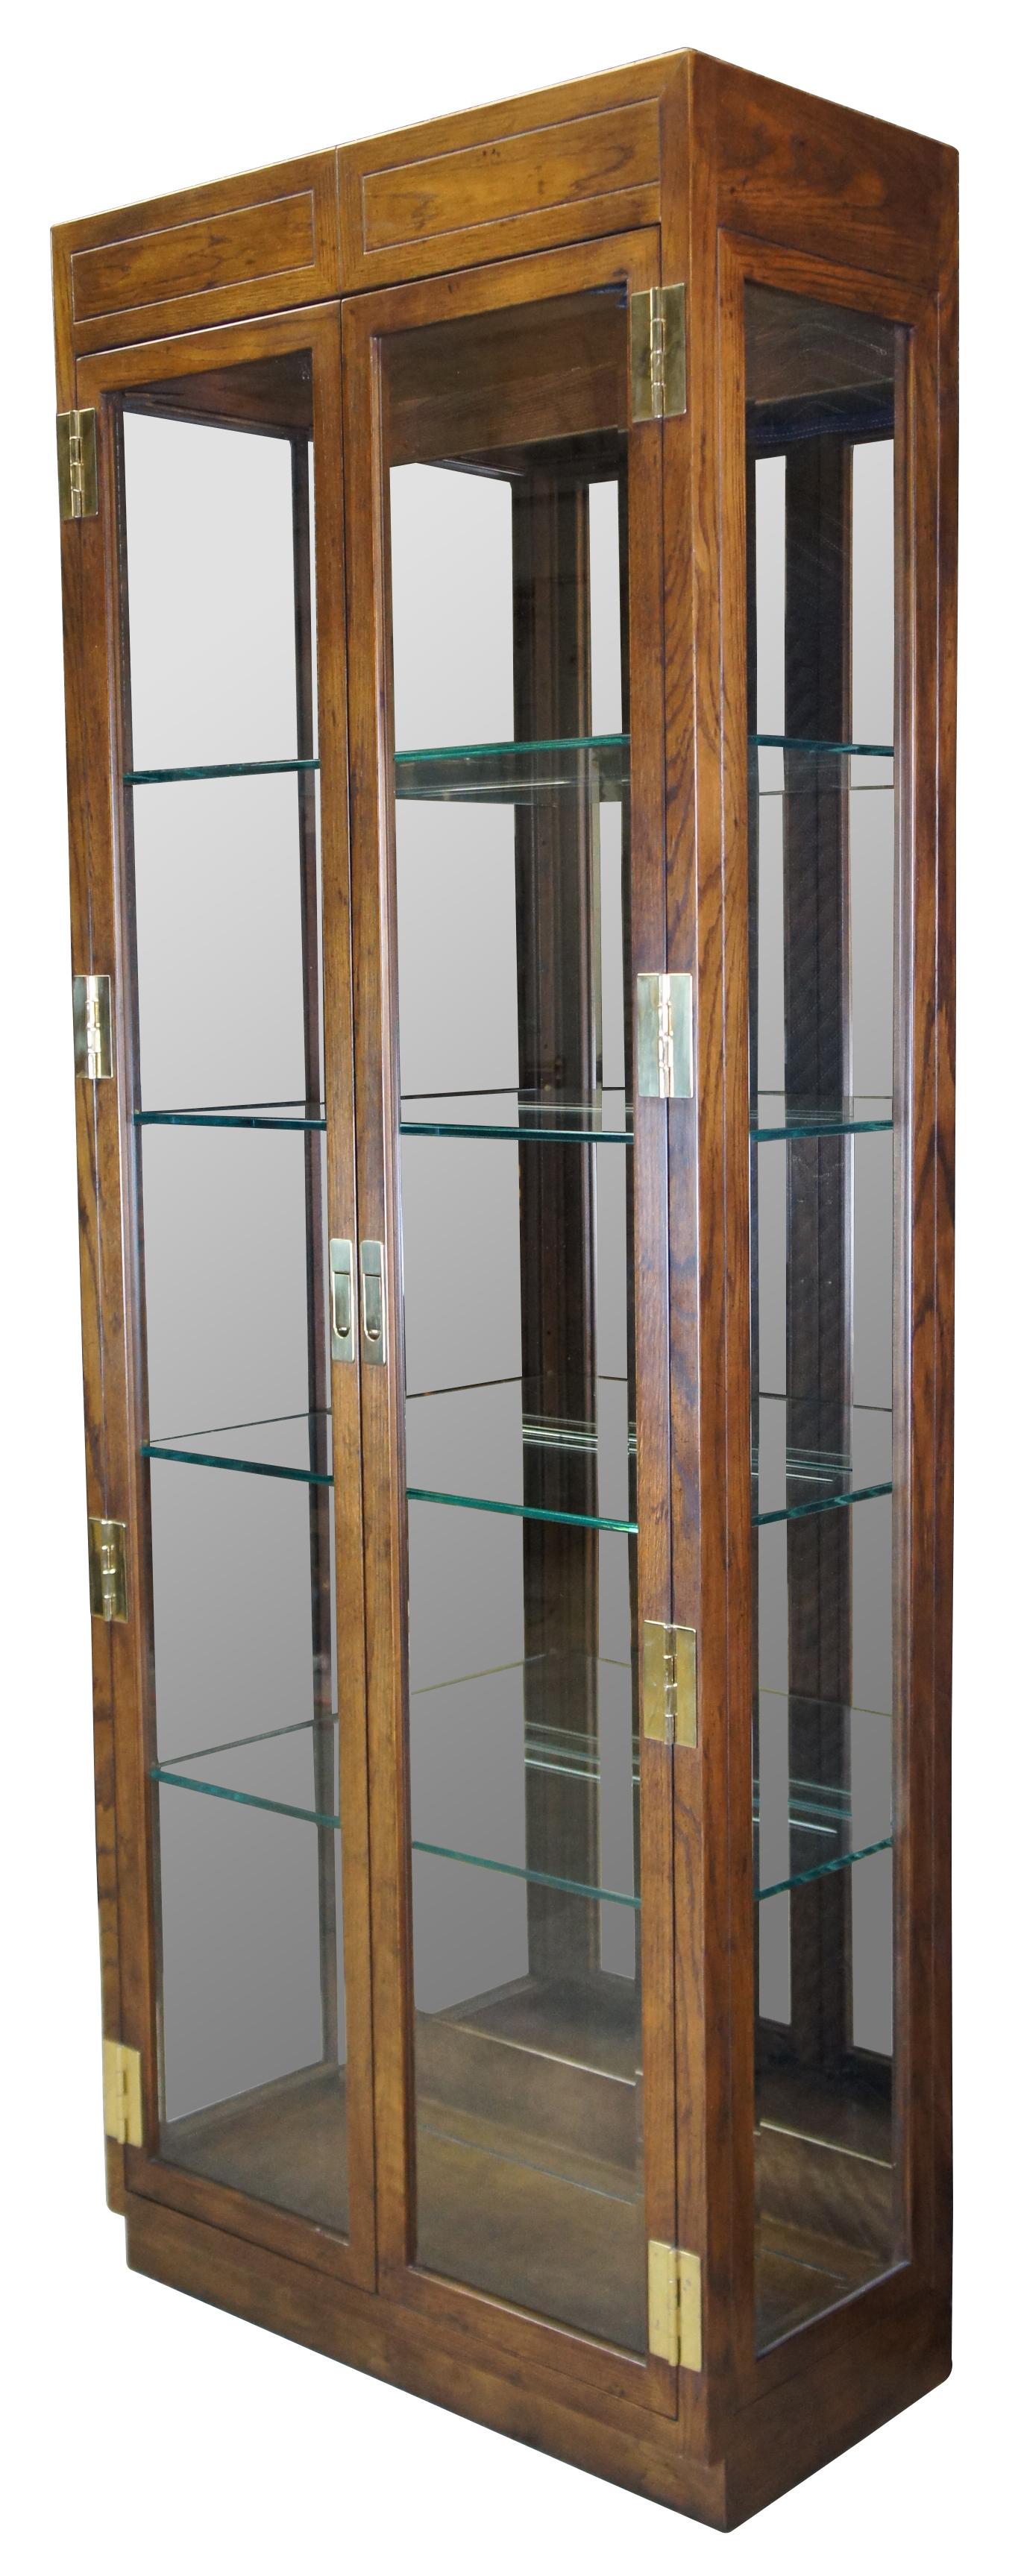 Mid-century Henredon Scene one display illuminated cabinet or vitrine. Made of oak featuring campaign styling with beveled glass sides / doors, brass hardware, and adjustable shelving with plate grooves.
9105-49. 160267. Circa 1964.